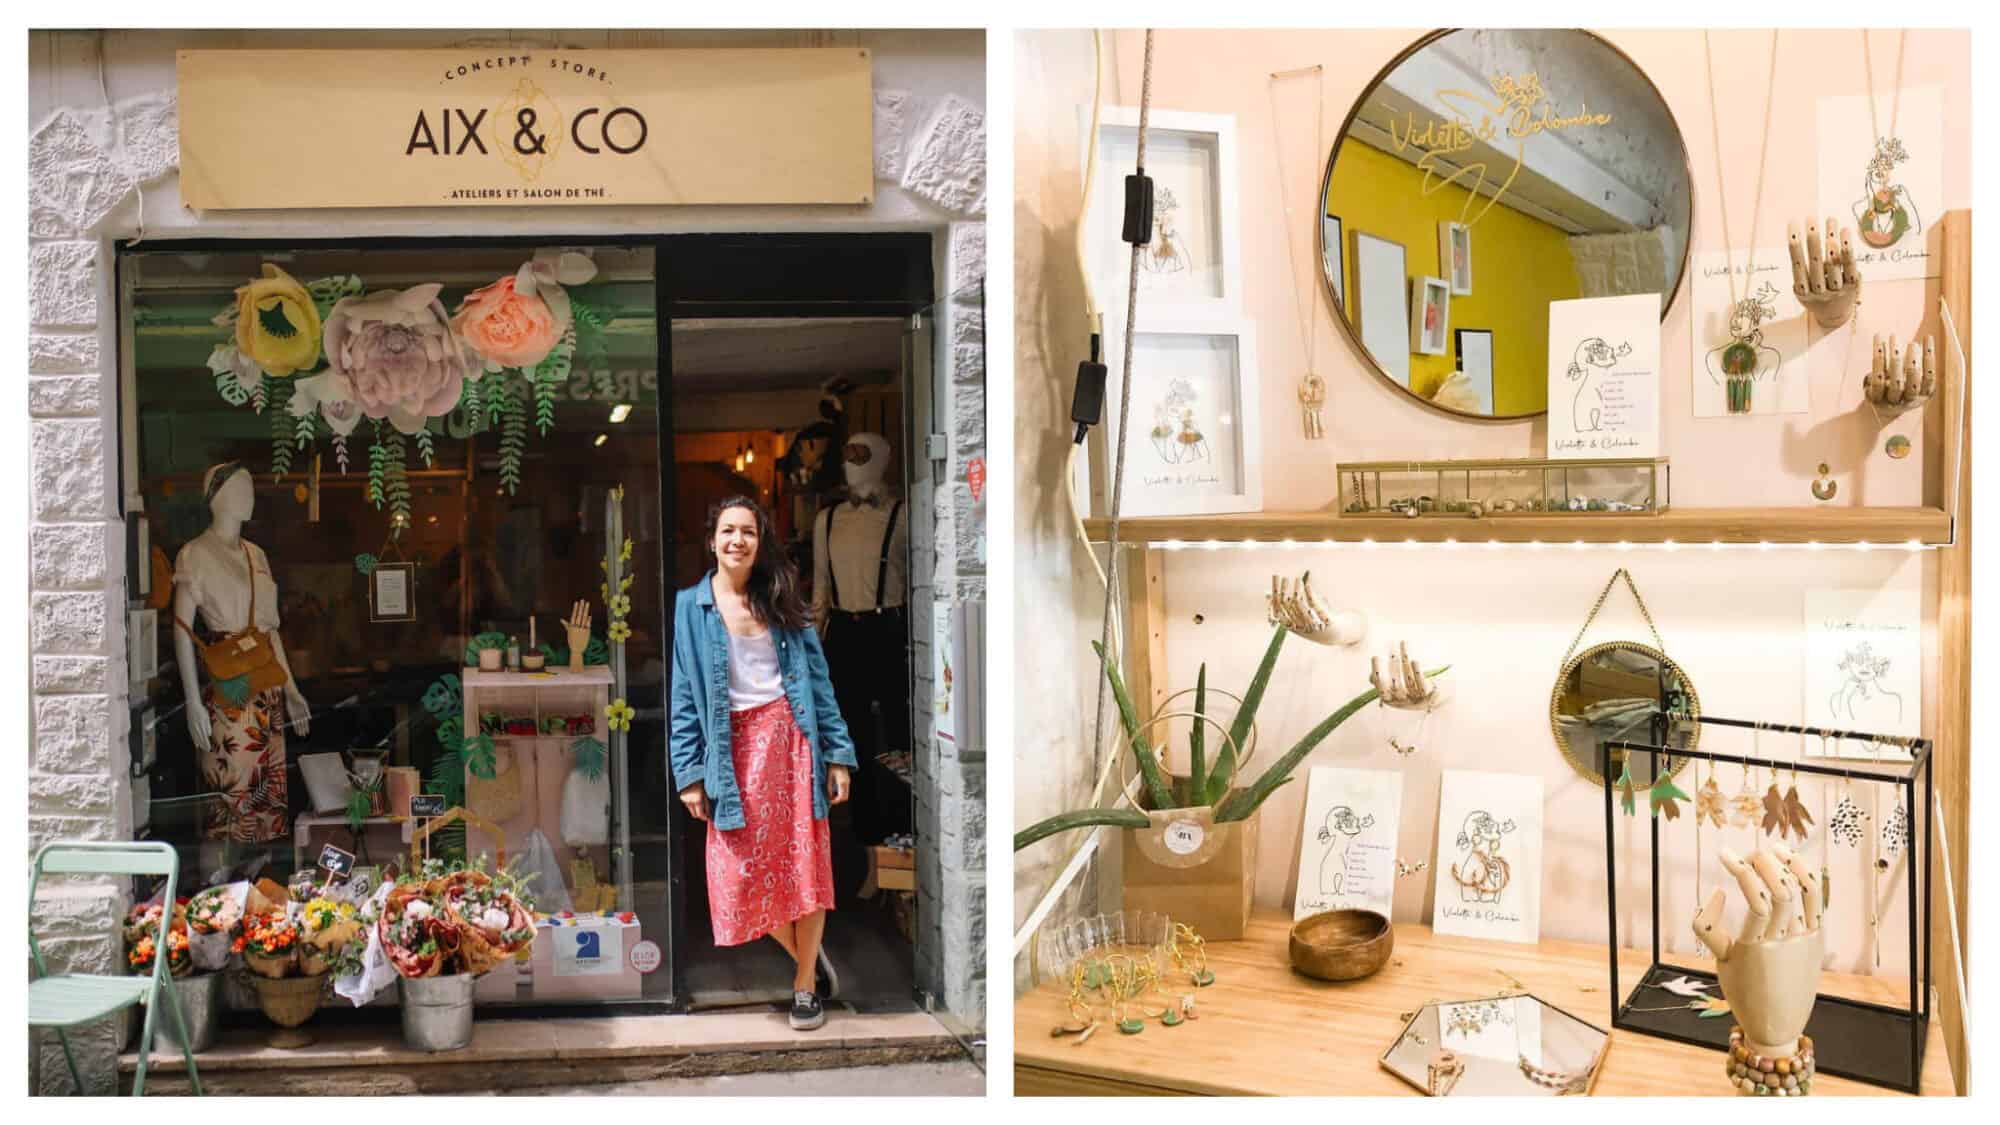 Left: A woman in a red skirt, white shirt and denim jacket stands outside Aix & Co, a concept store in Aix-en-Provence, Right: A display of jewelry  from Violette & Colombe sits on display at Aix & Co concept store in Aix-en-Provence